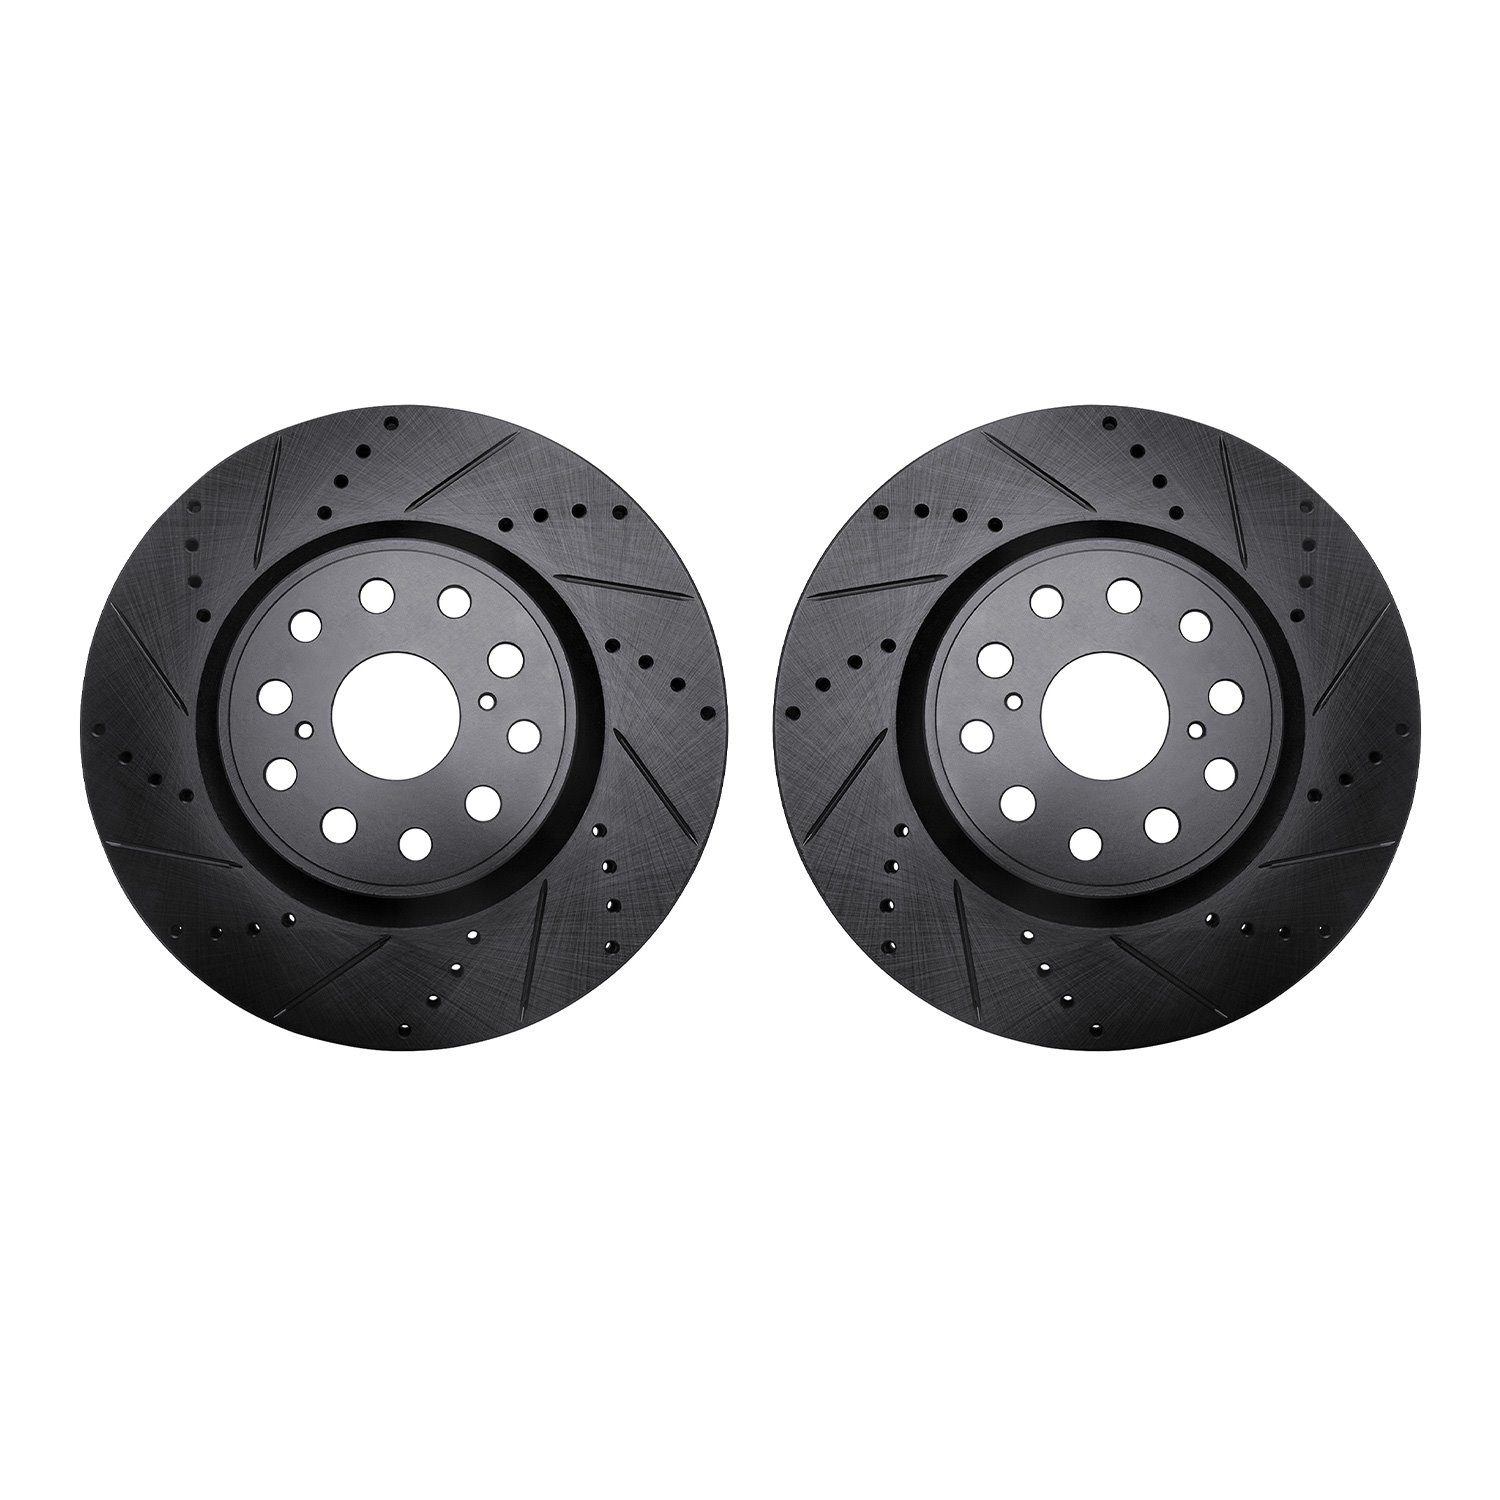 8002-75016 Drilled/Slotted Brake Rotors [Black], Fits Select Lexus/Toyota/Scion, Position: Front